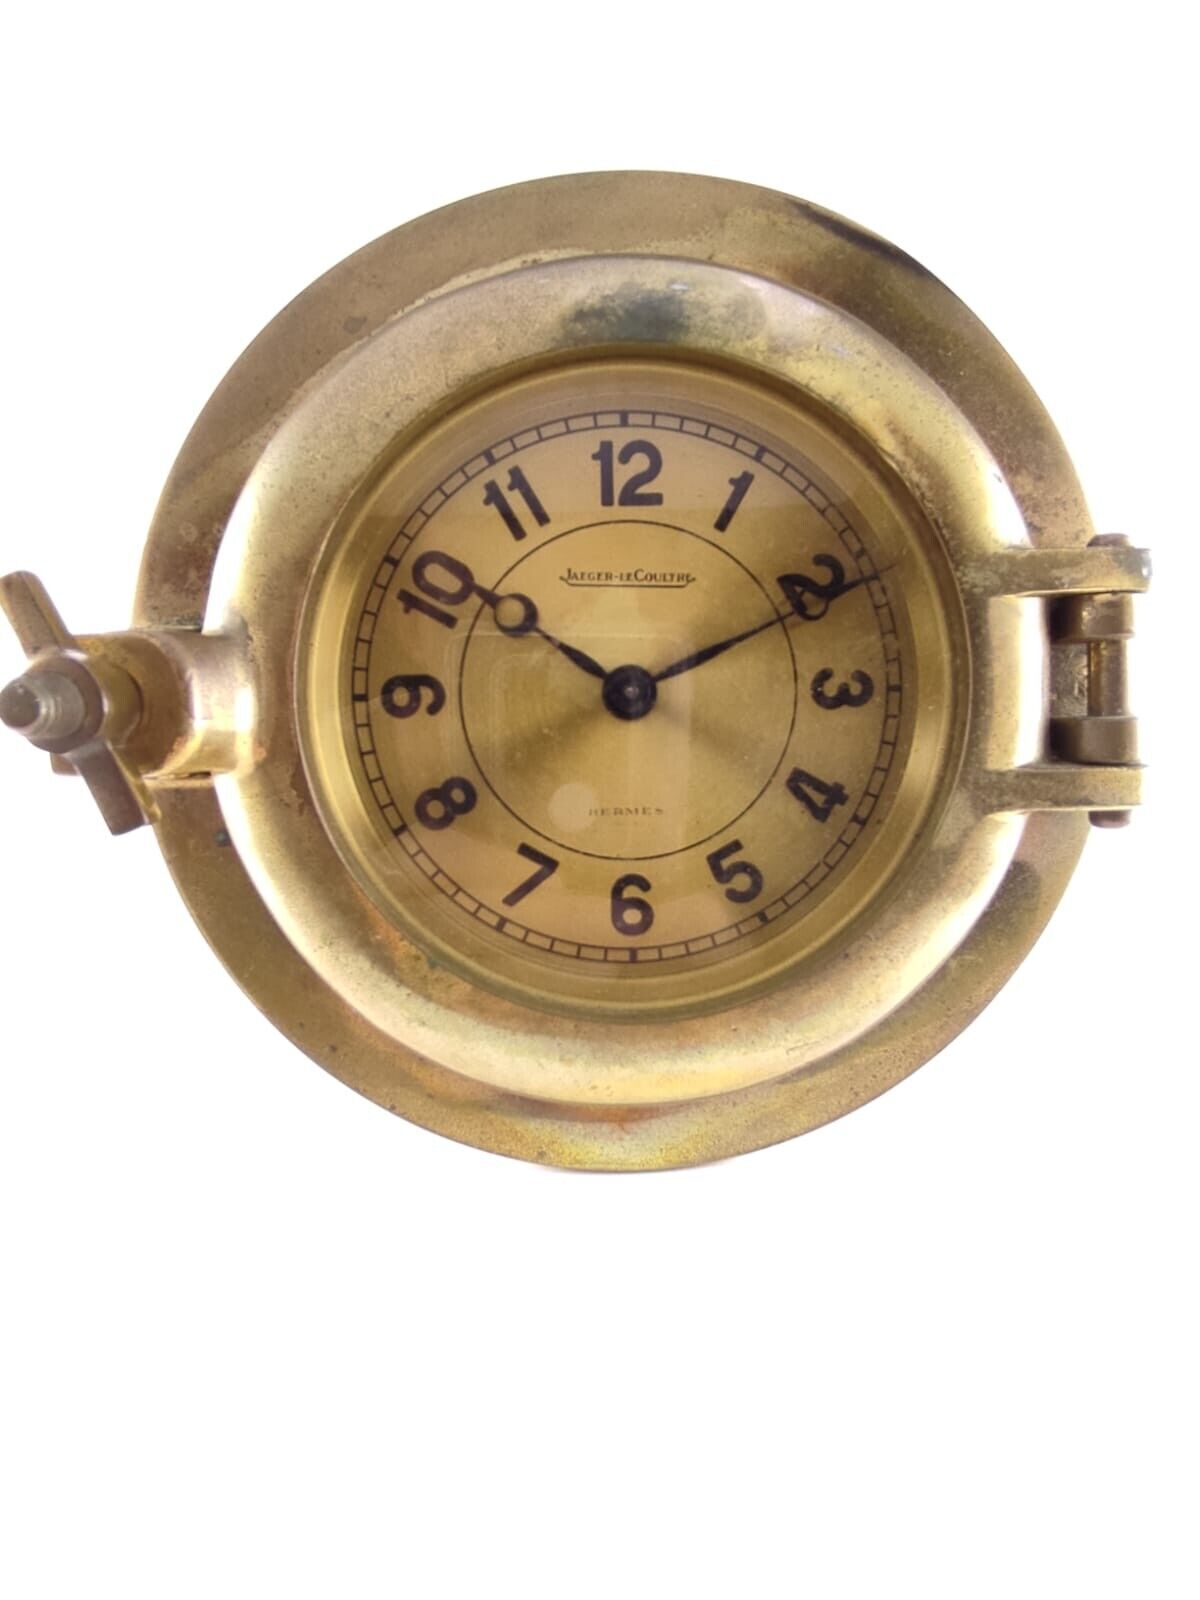 Jaeger-Le Coultre RARE Porthole Hermes Clock and Barometer Brass 1940s Collectab